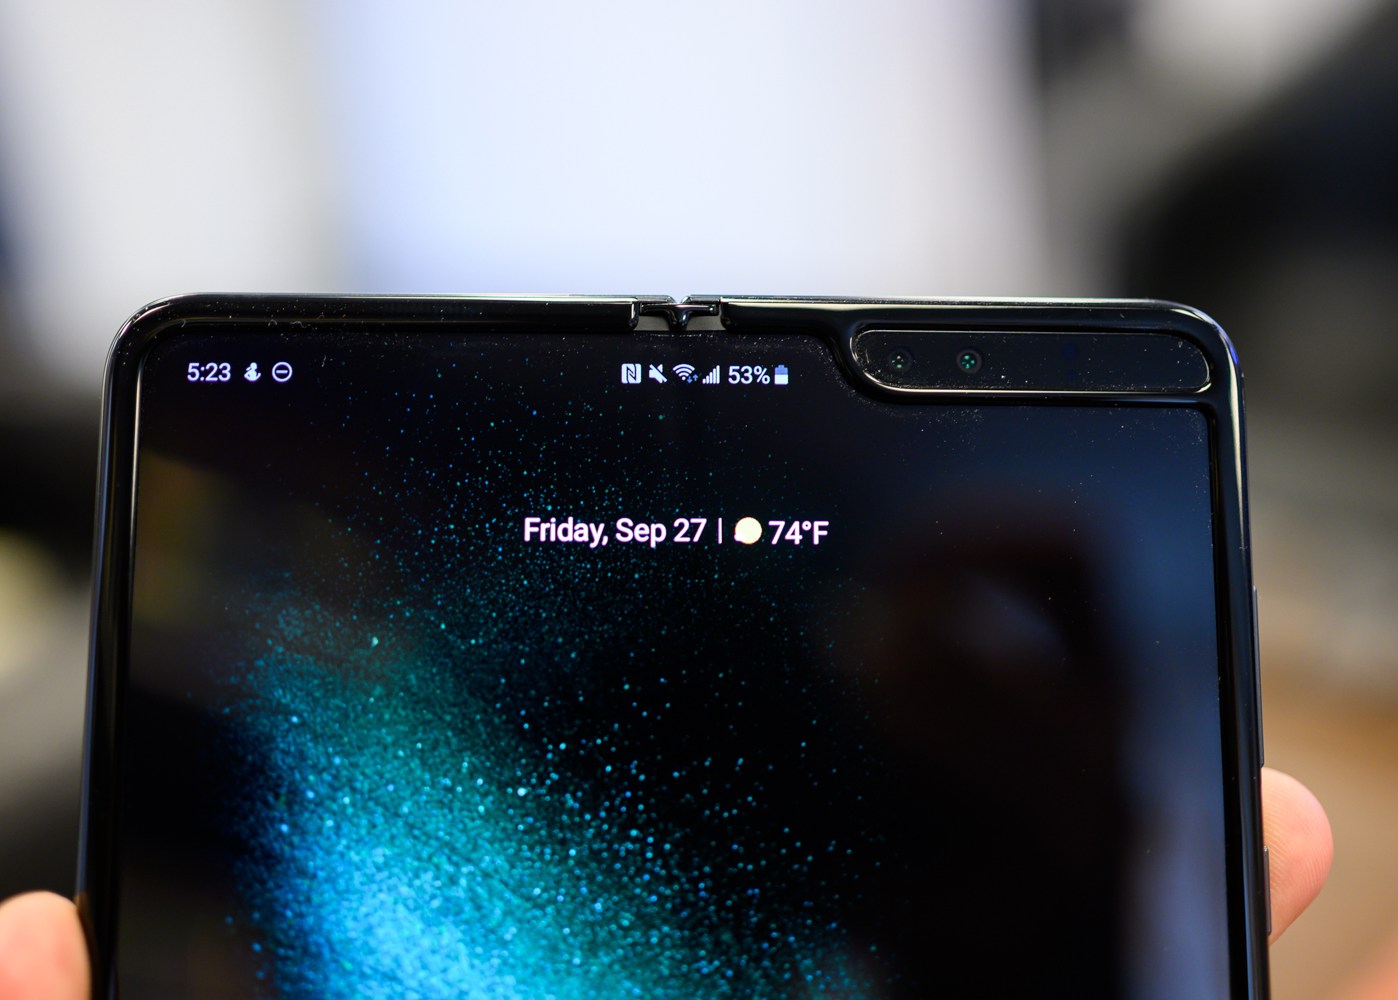 Hot rumor calls for Samsung to replace Bixby with 3D assistant